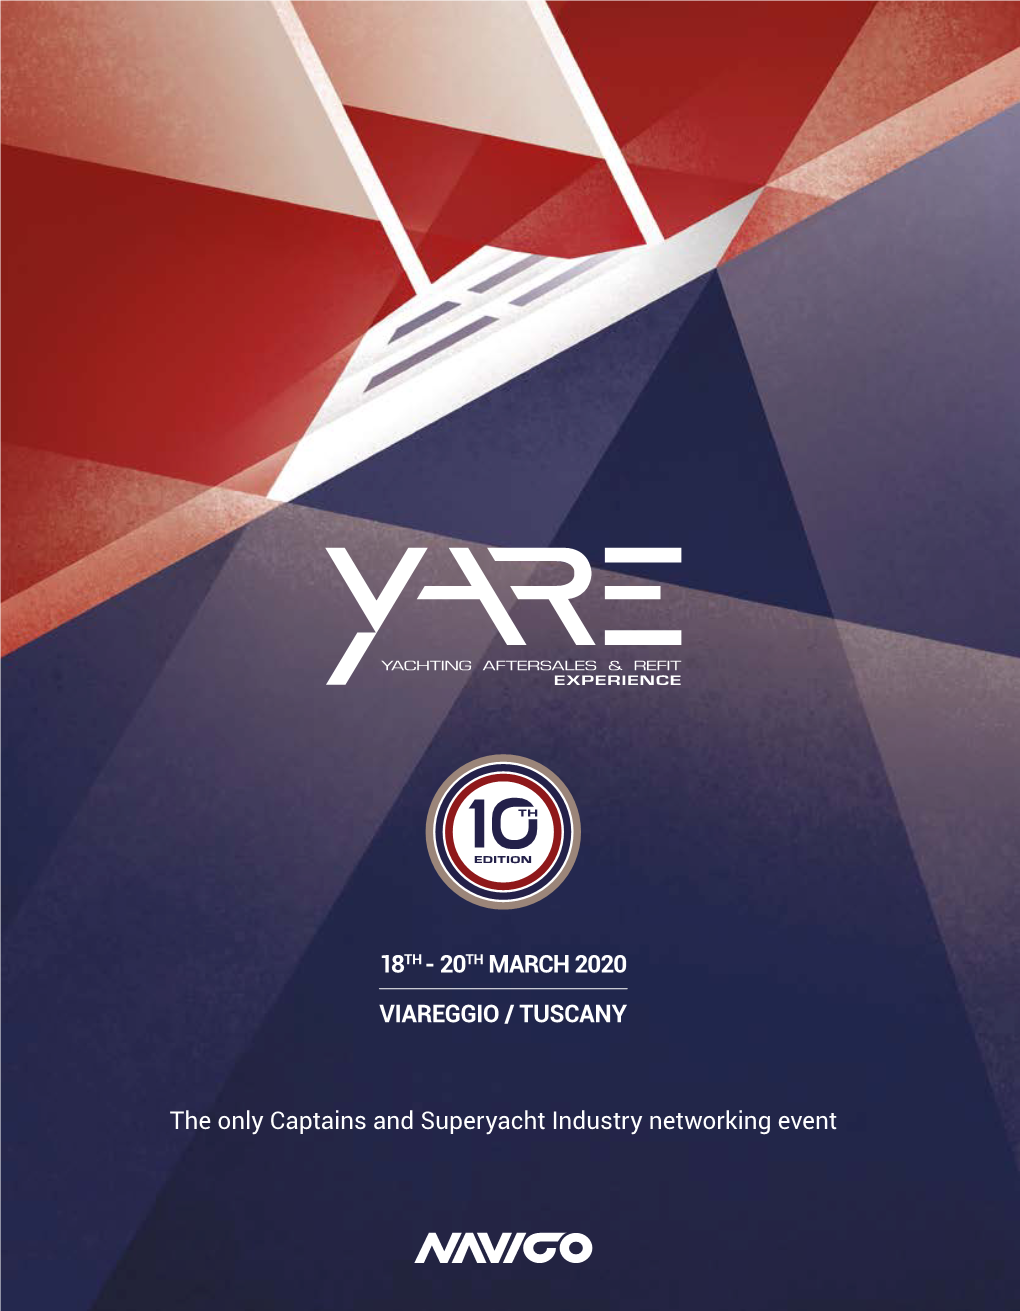 20TH MARCH 2020 VIAREGGIO / TUSCANY the Only Captains and Superyacht Industry Networking Event